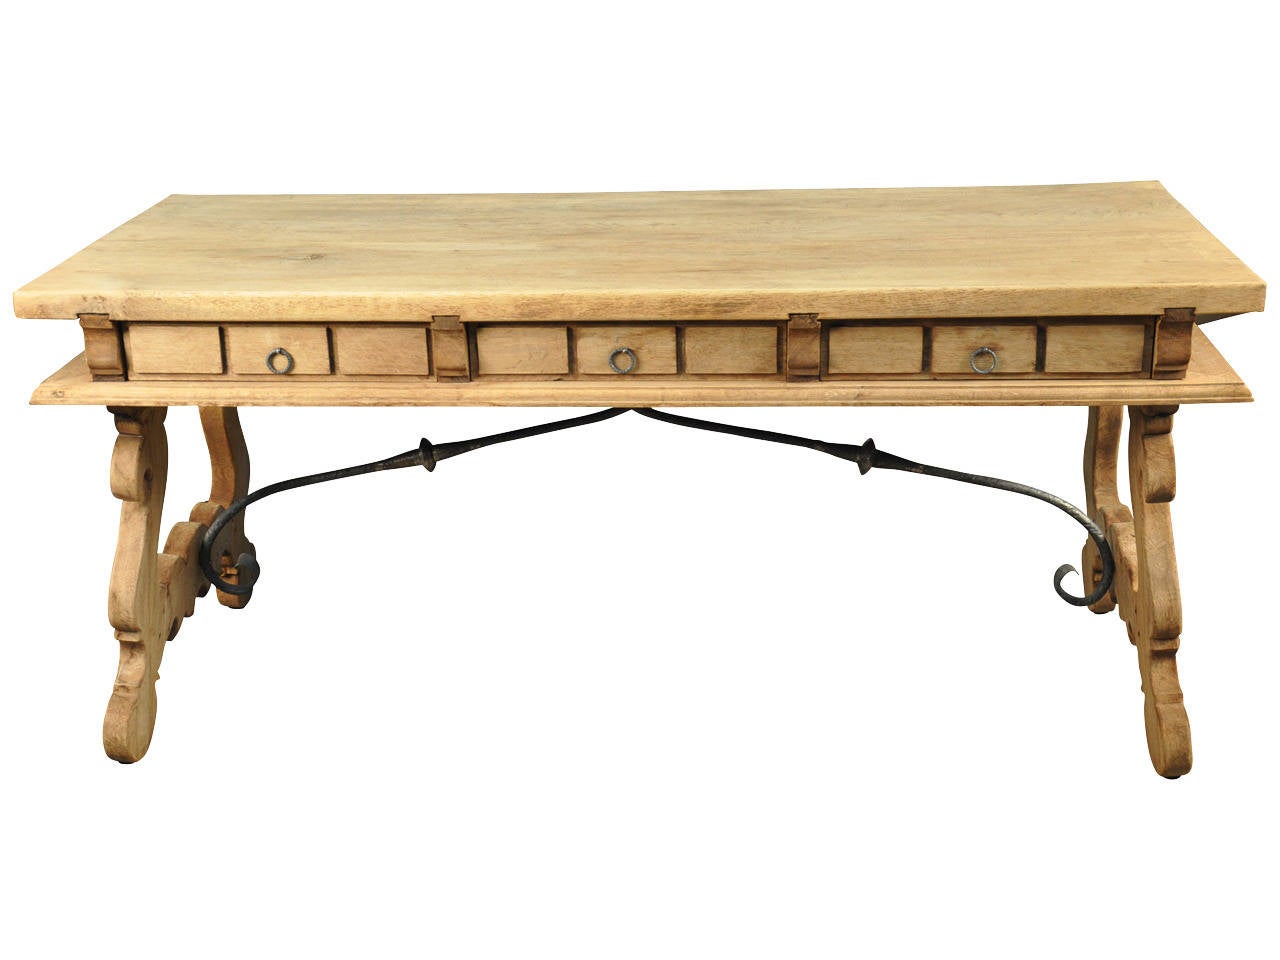 A very handsome desk or writing table in washed oak from the Catalan region of Spain.  This piece has three drawers, beautifully sculpted legs and iron trestles.  Not only does it serves as a wonderful desk, but as a sofa table or console as well.